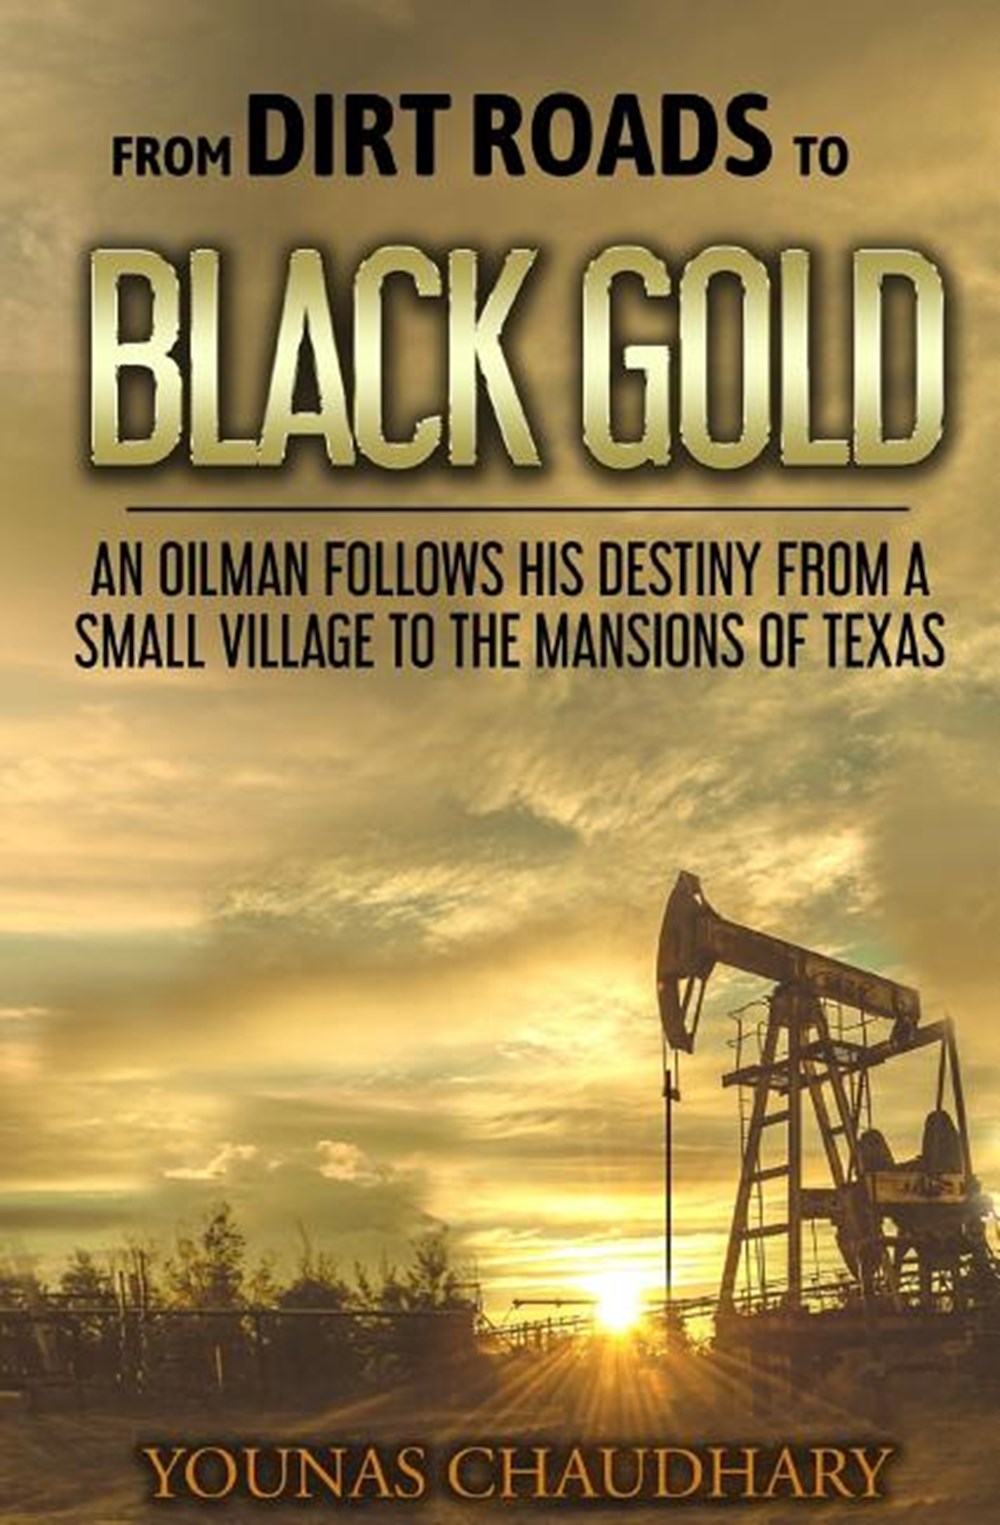 From Dirt Roads to Black Gold: An Oilman Follows His Destiny from a Small Village to the Mansions of